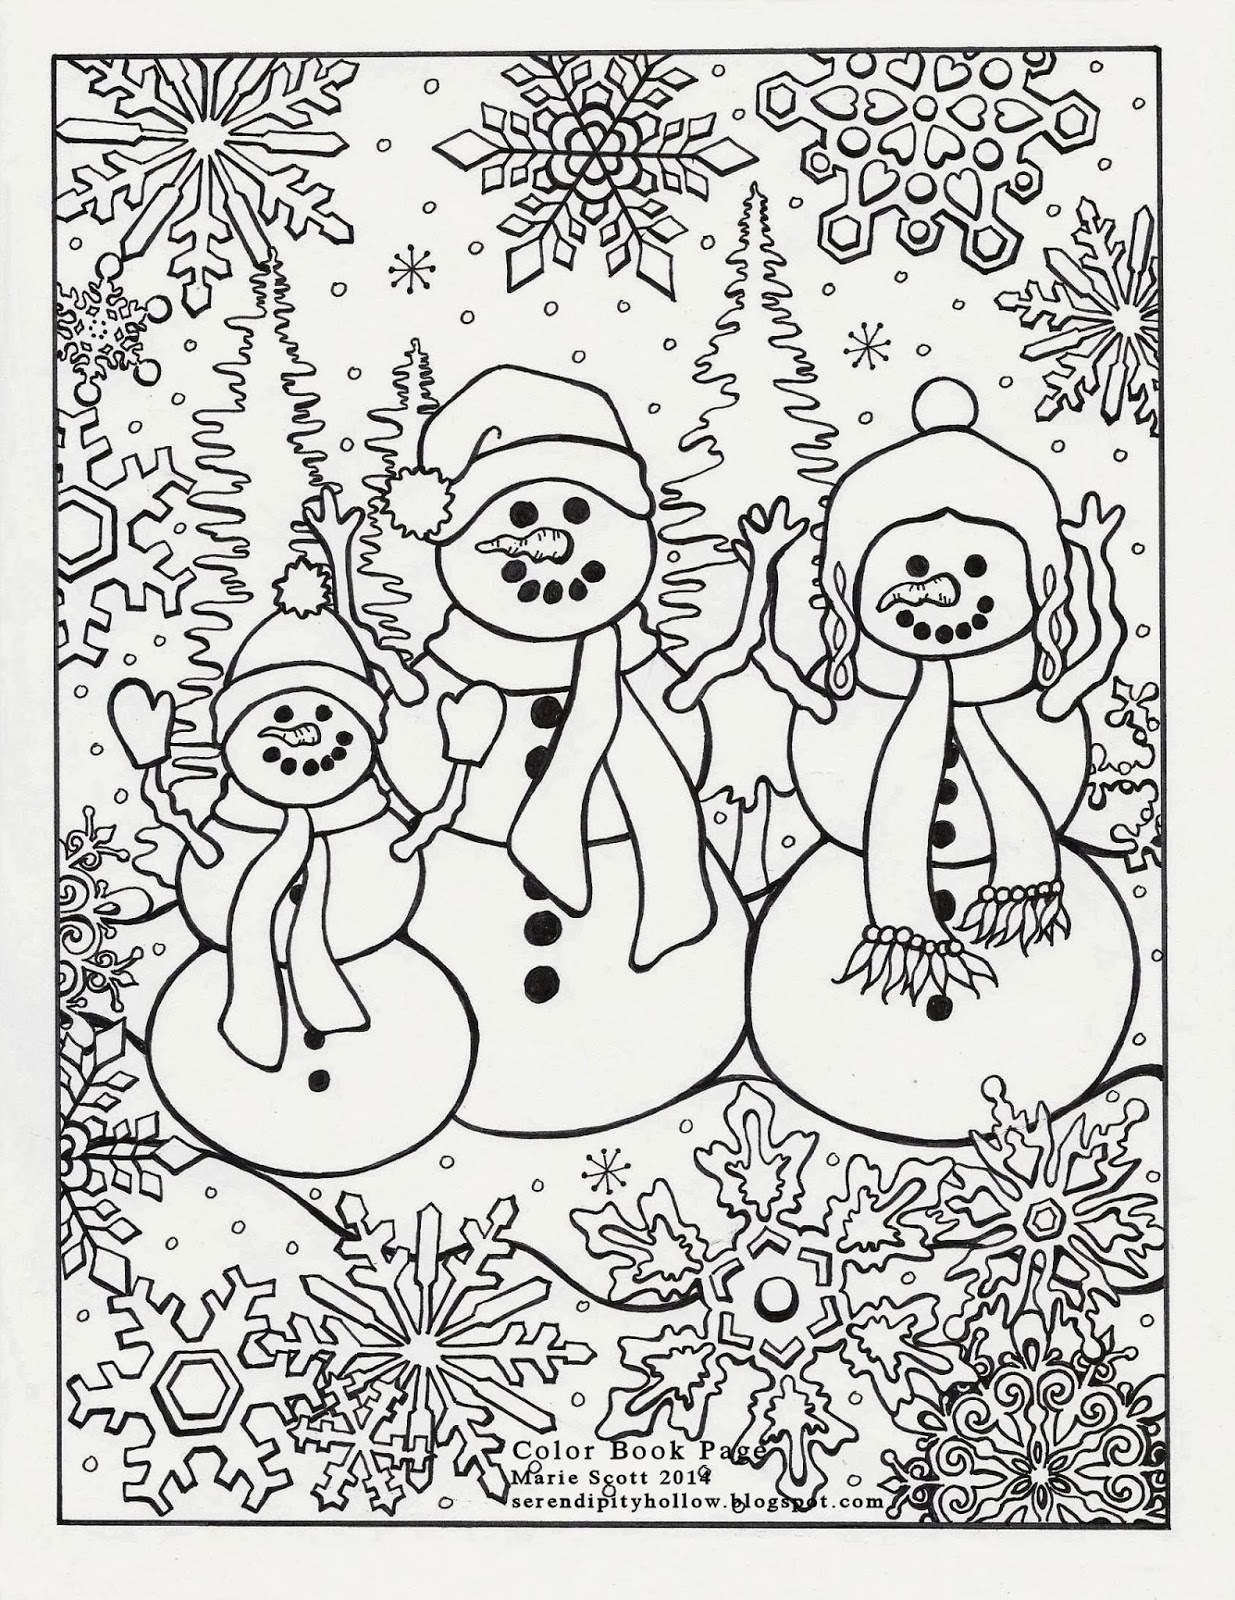 Download Serendipity Hollow: Winter Coloring Book Page